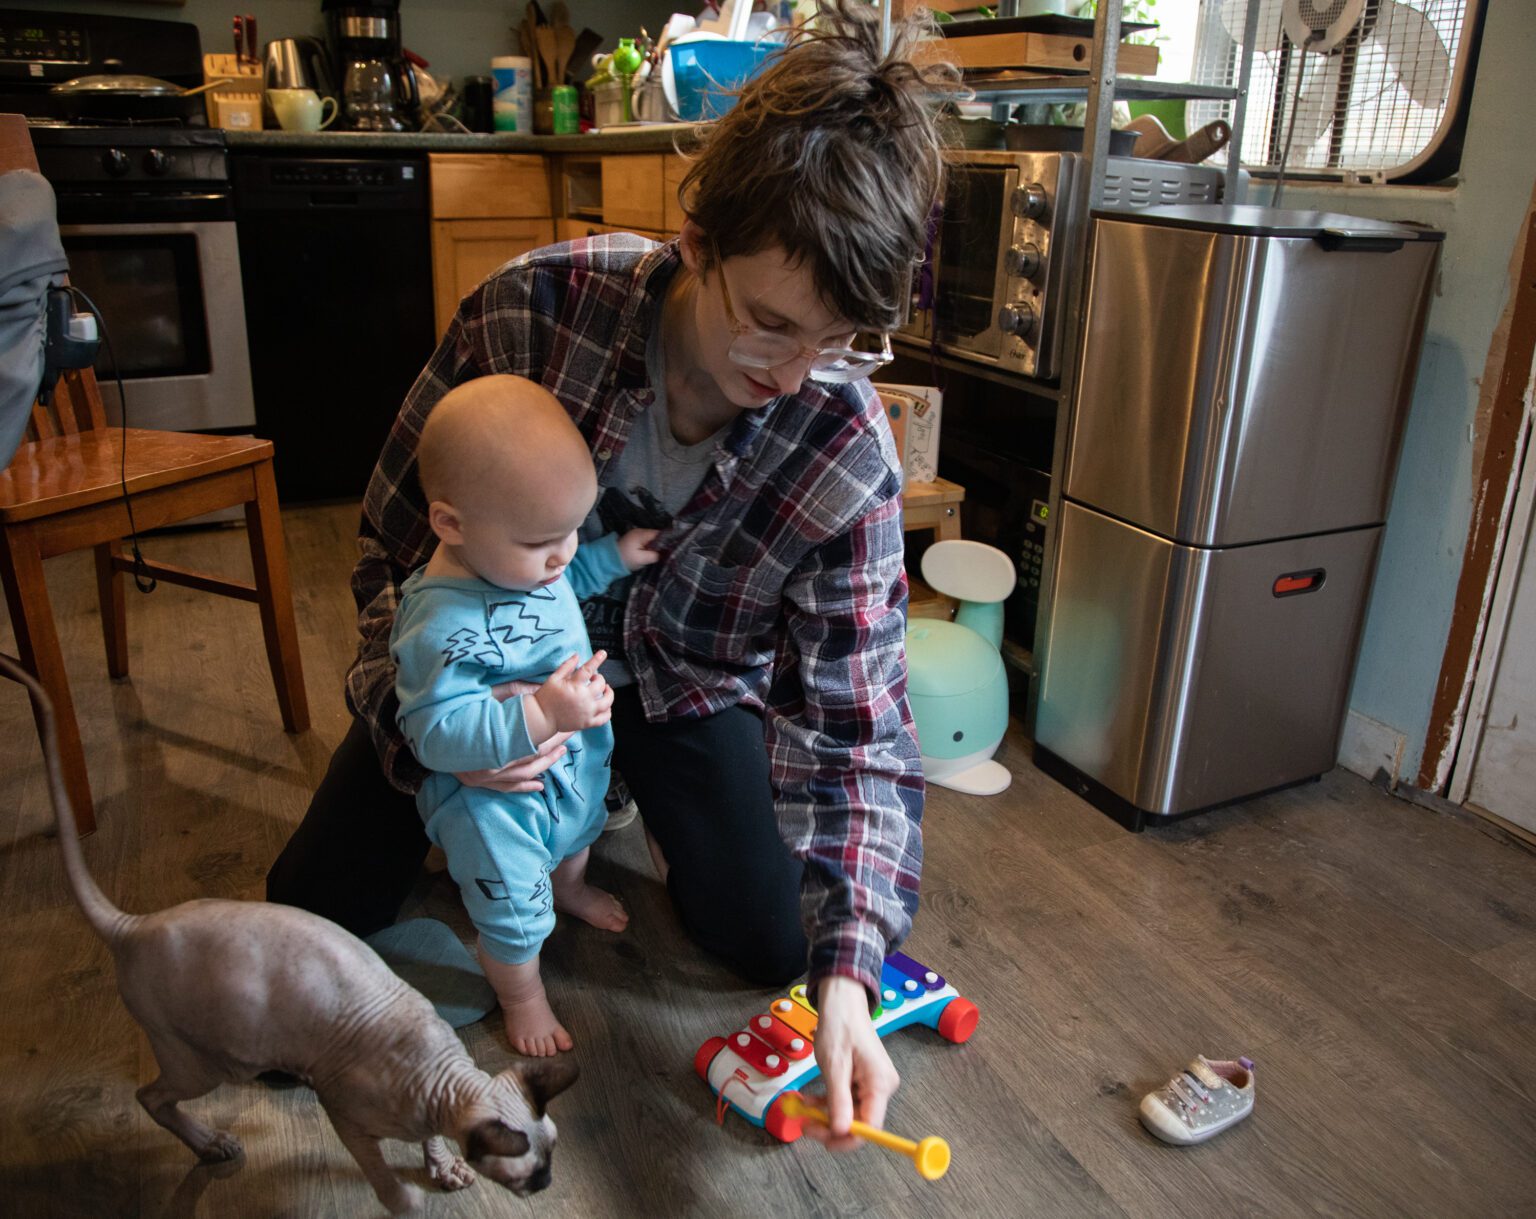 Laura Klotzer, 32, engages 10-month-old Ember with a toy.